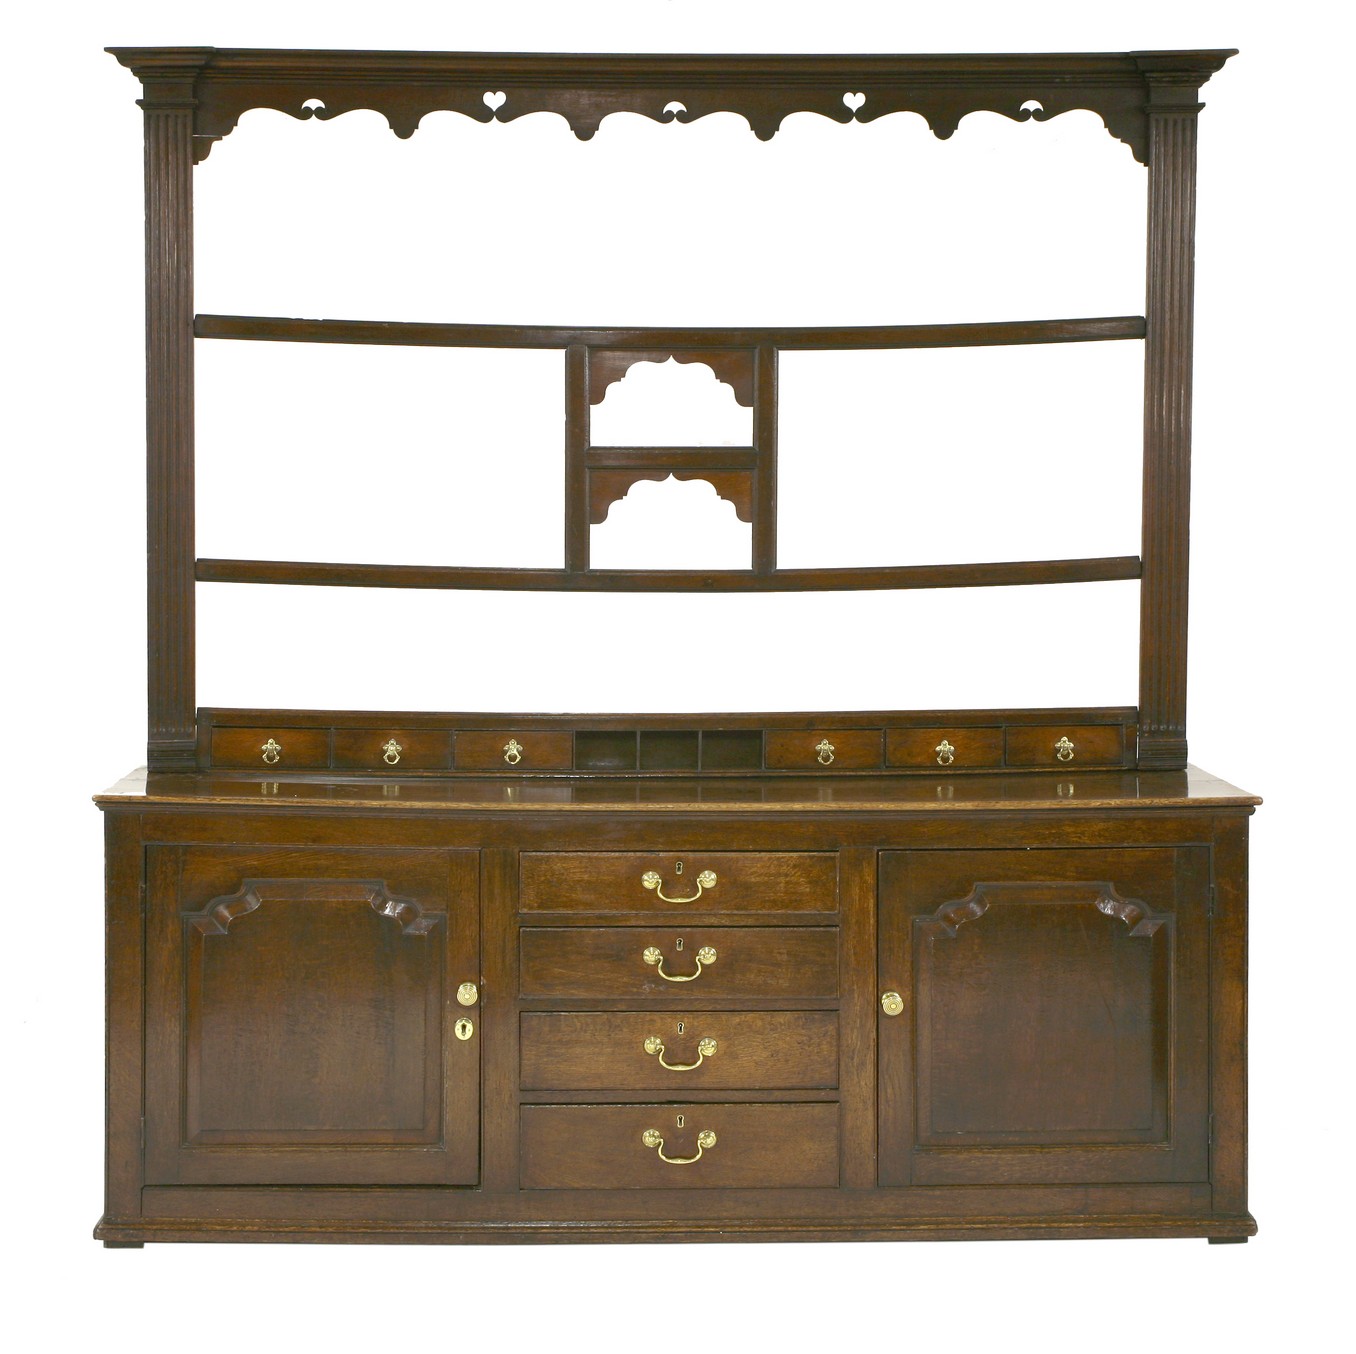 A large Cumbrian oak dresser,
mid 18th century, the open plate rack with three shelves flanked